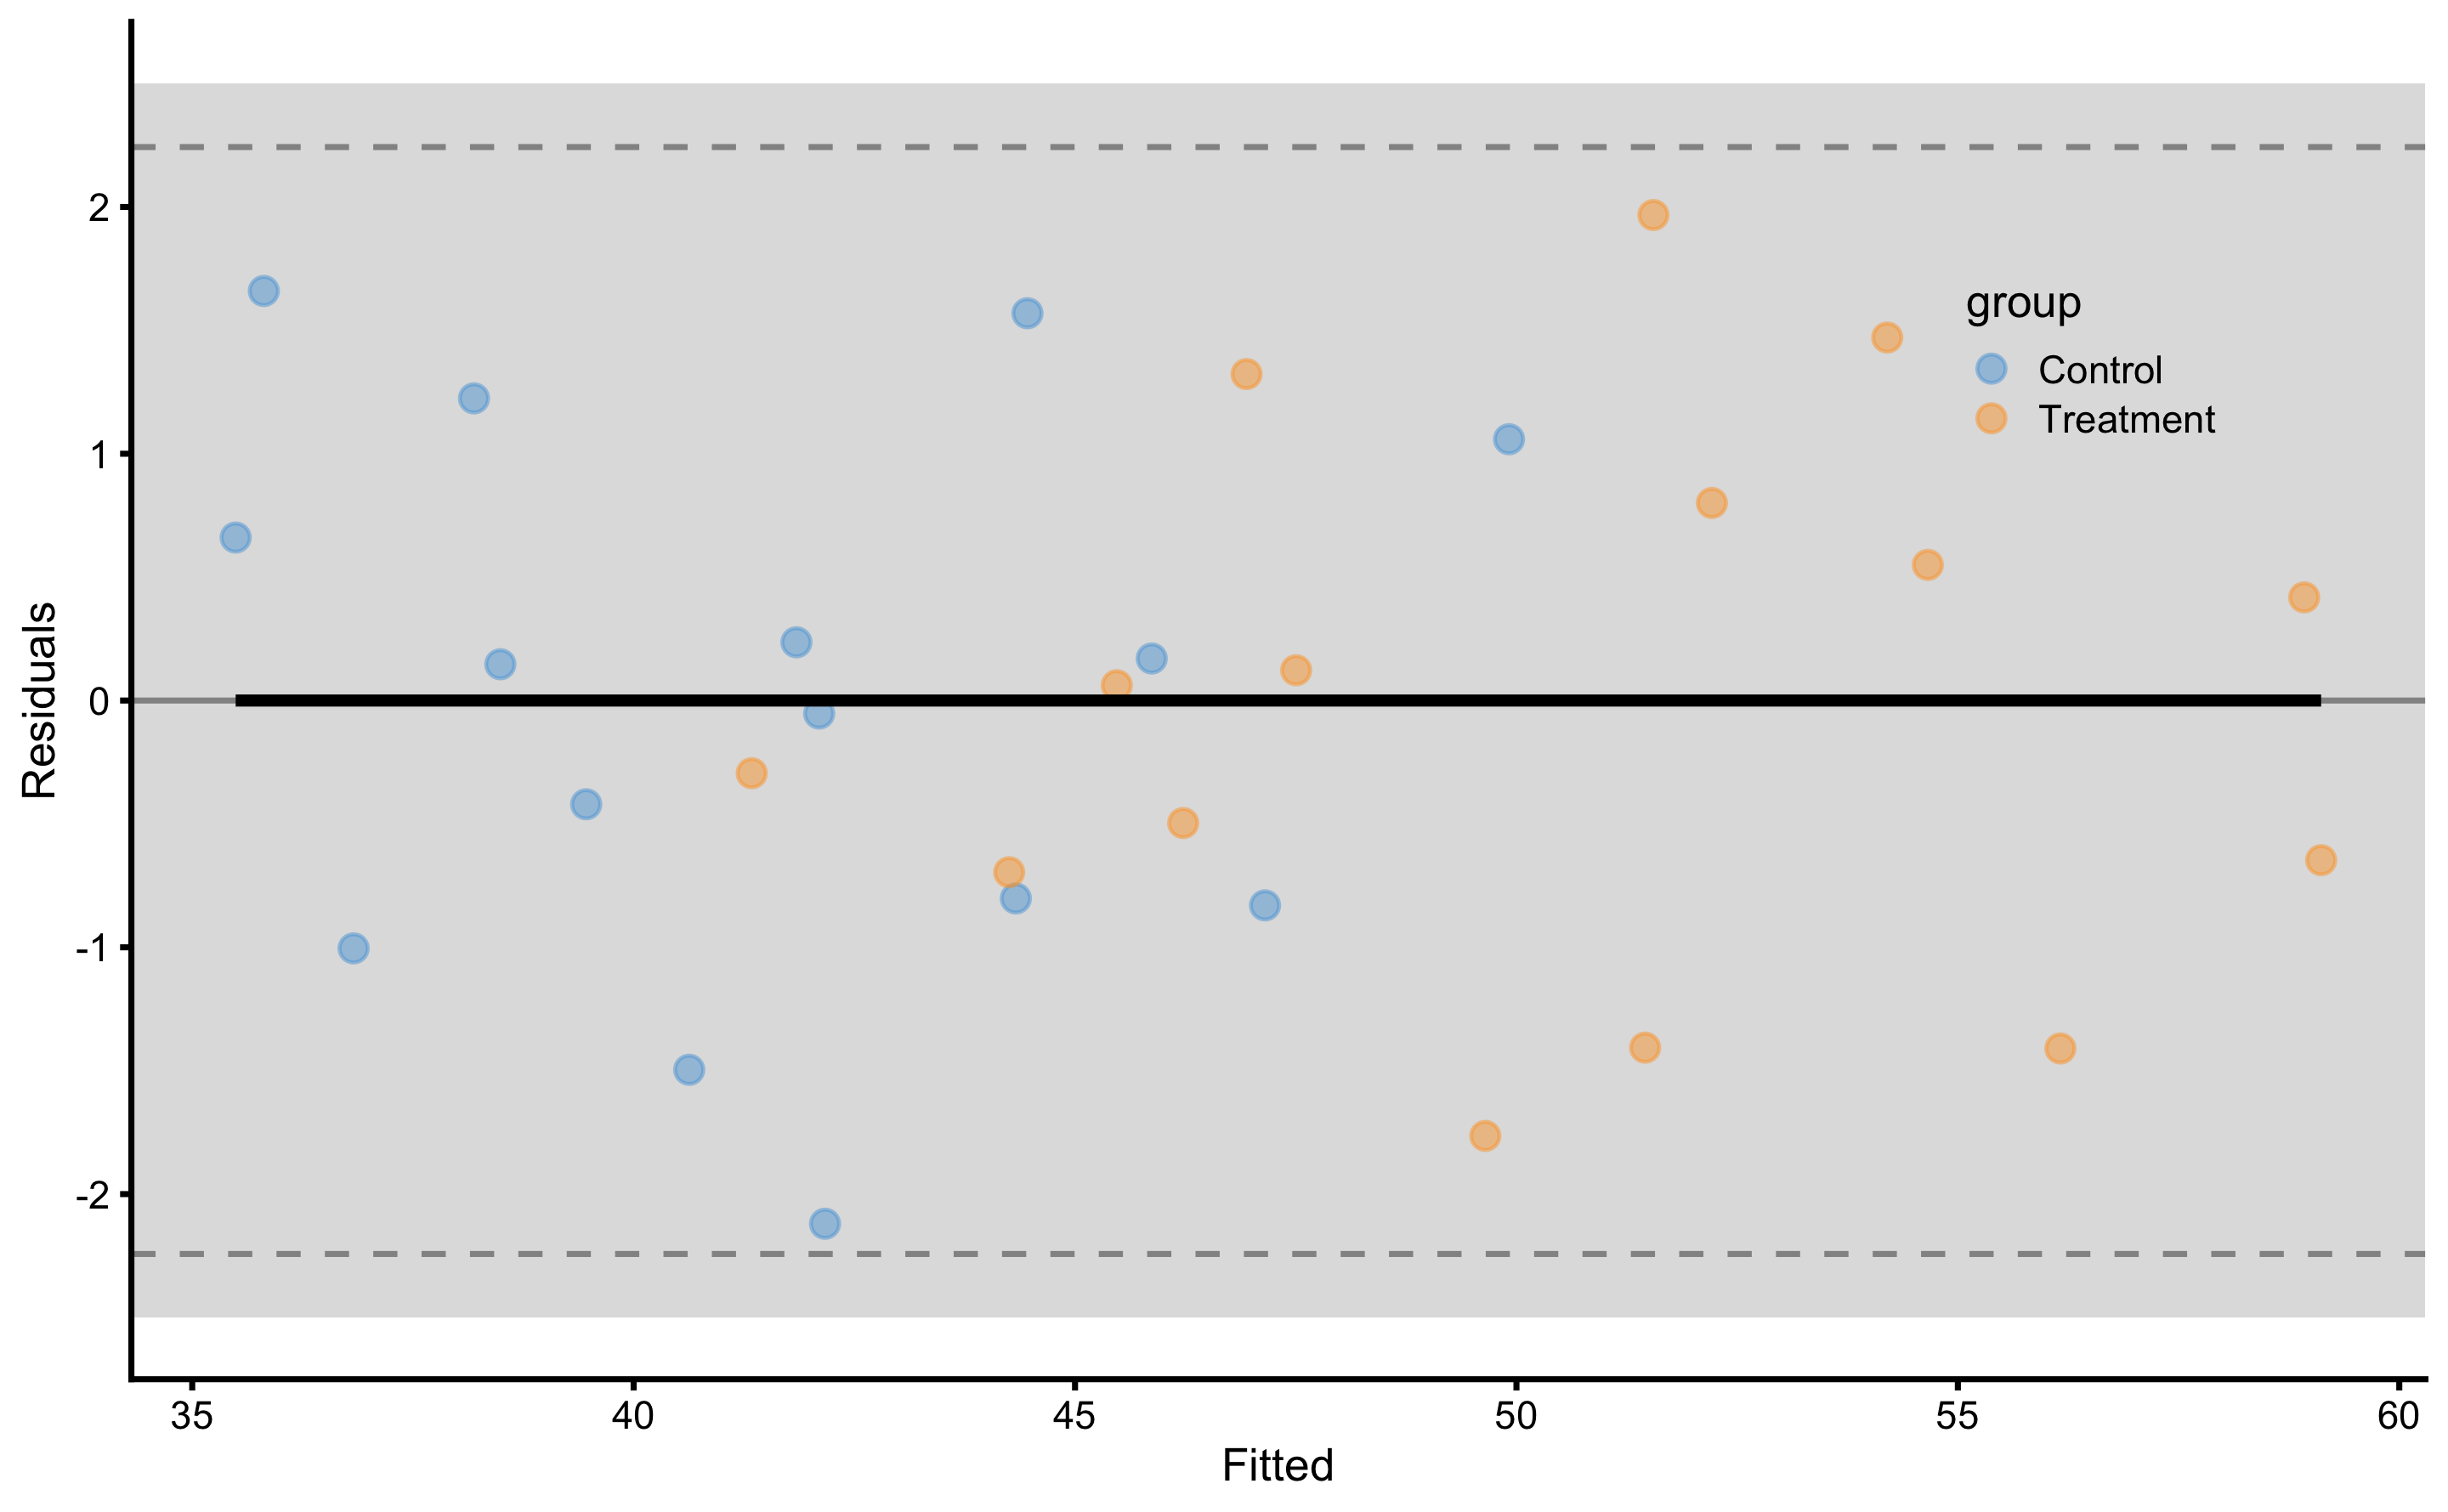 Residuals of the linear regression RCT model with interaction. Grey band on both panels represents SESOI of ±2.5cm